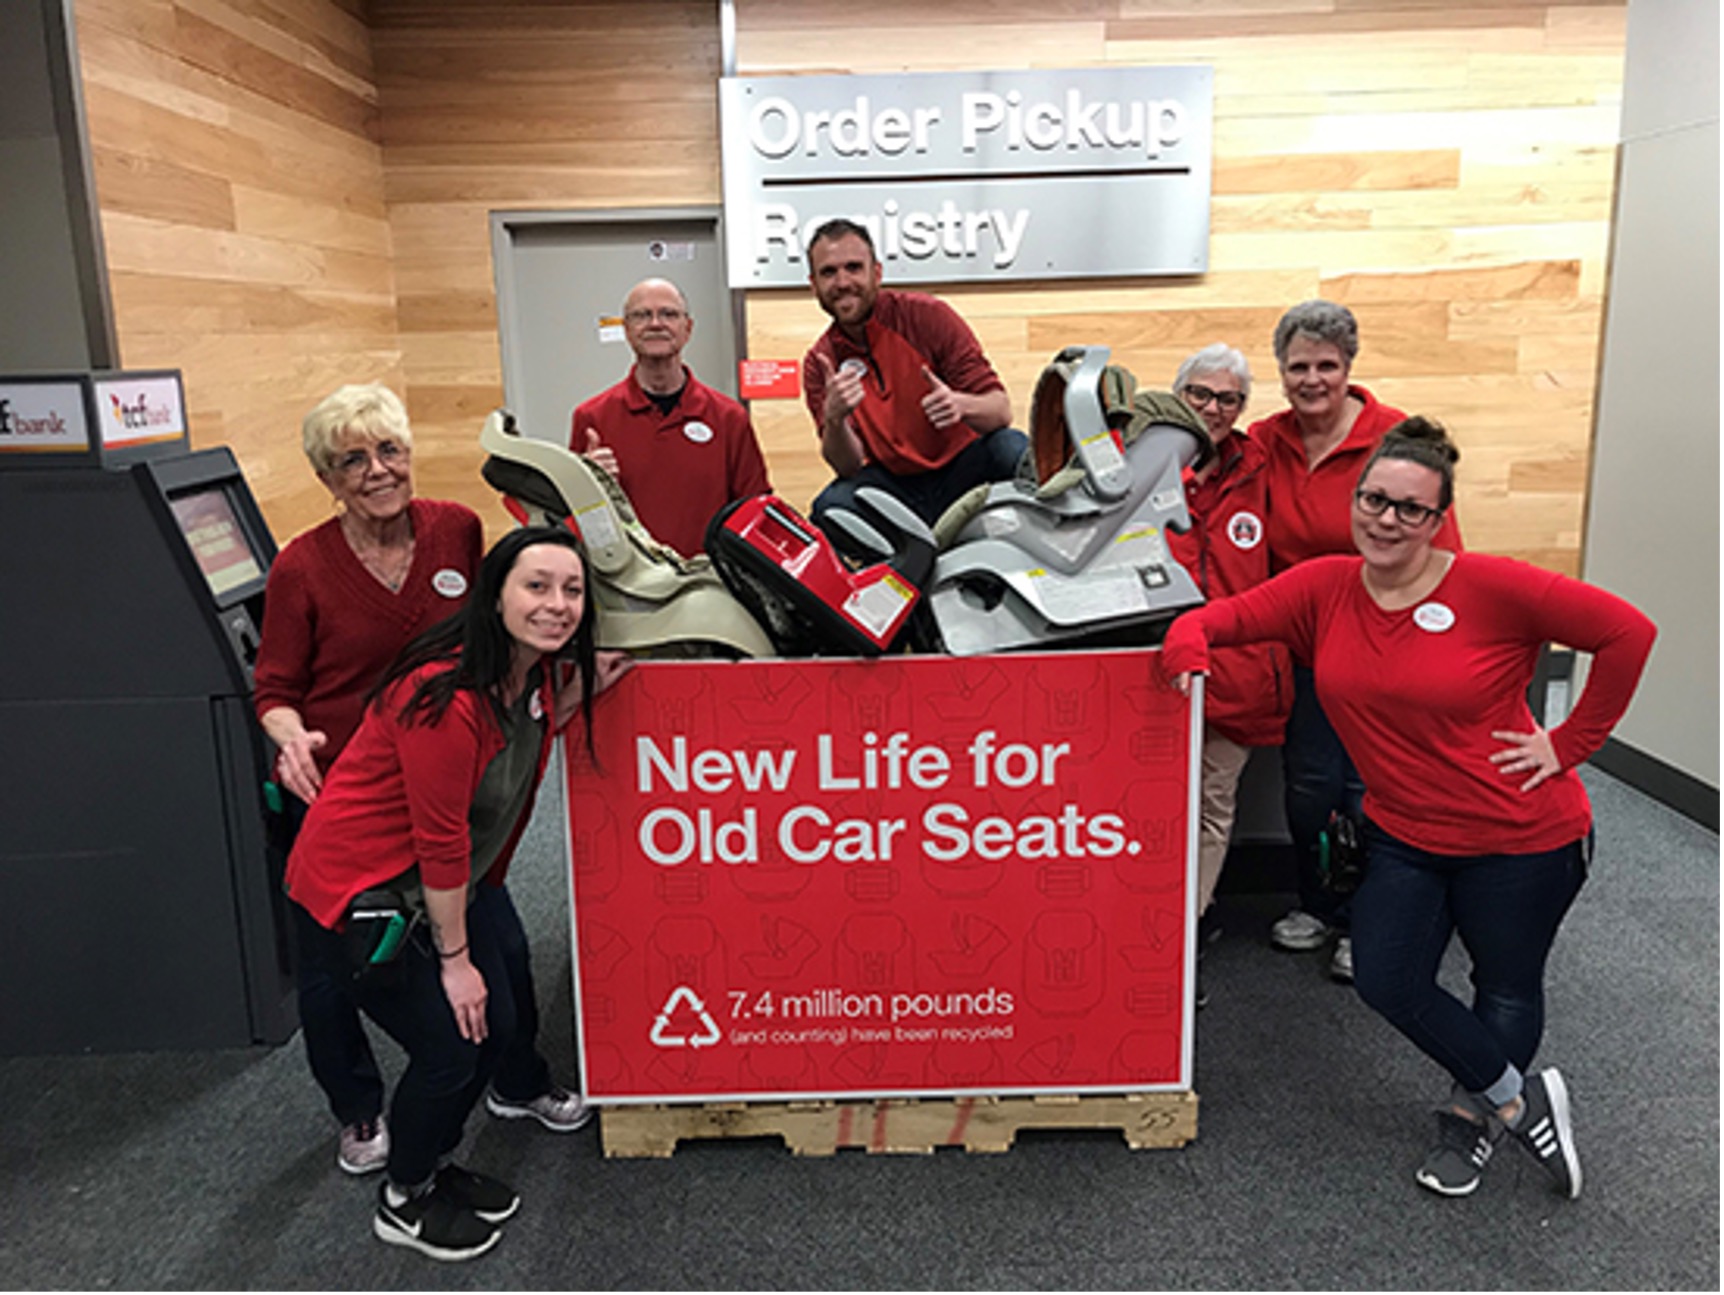 A photo of seven team members in red shirts, jeans and name badges, smiling as they gather around a large drop-off box at their store filled with used car seats for recycling.